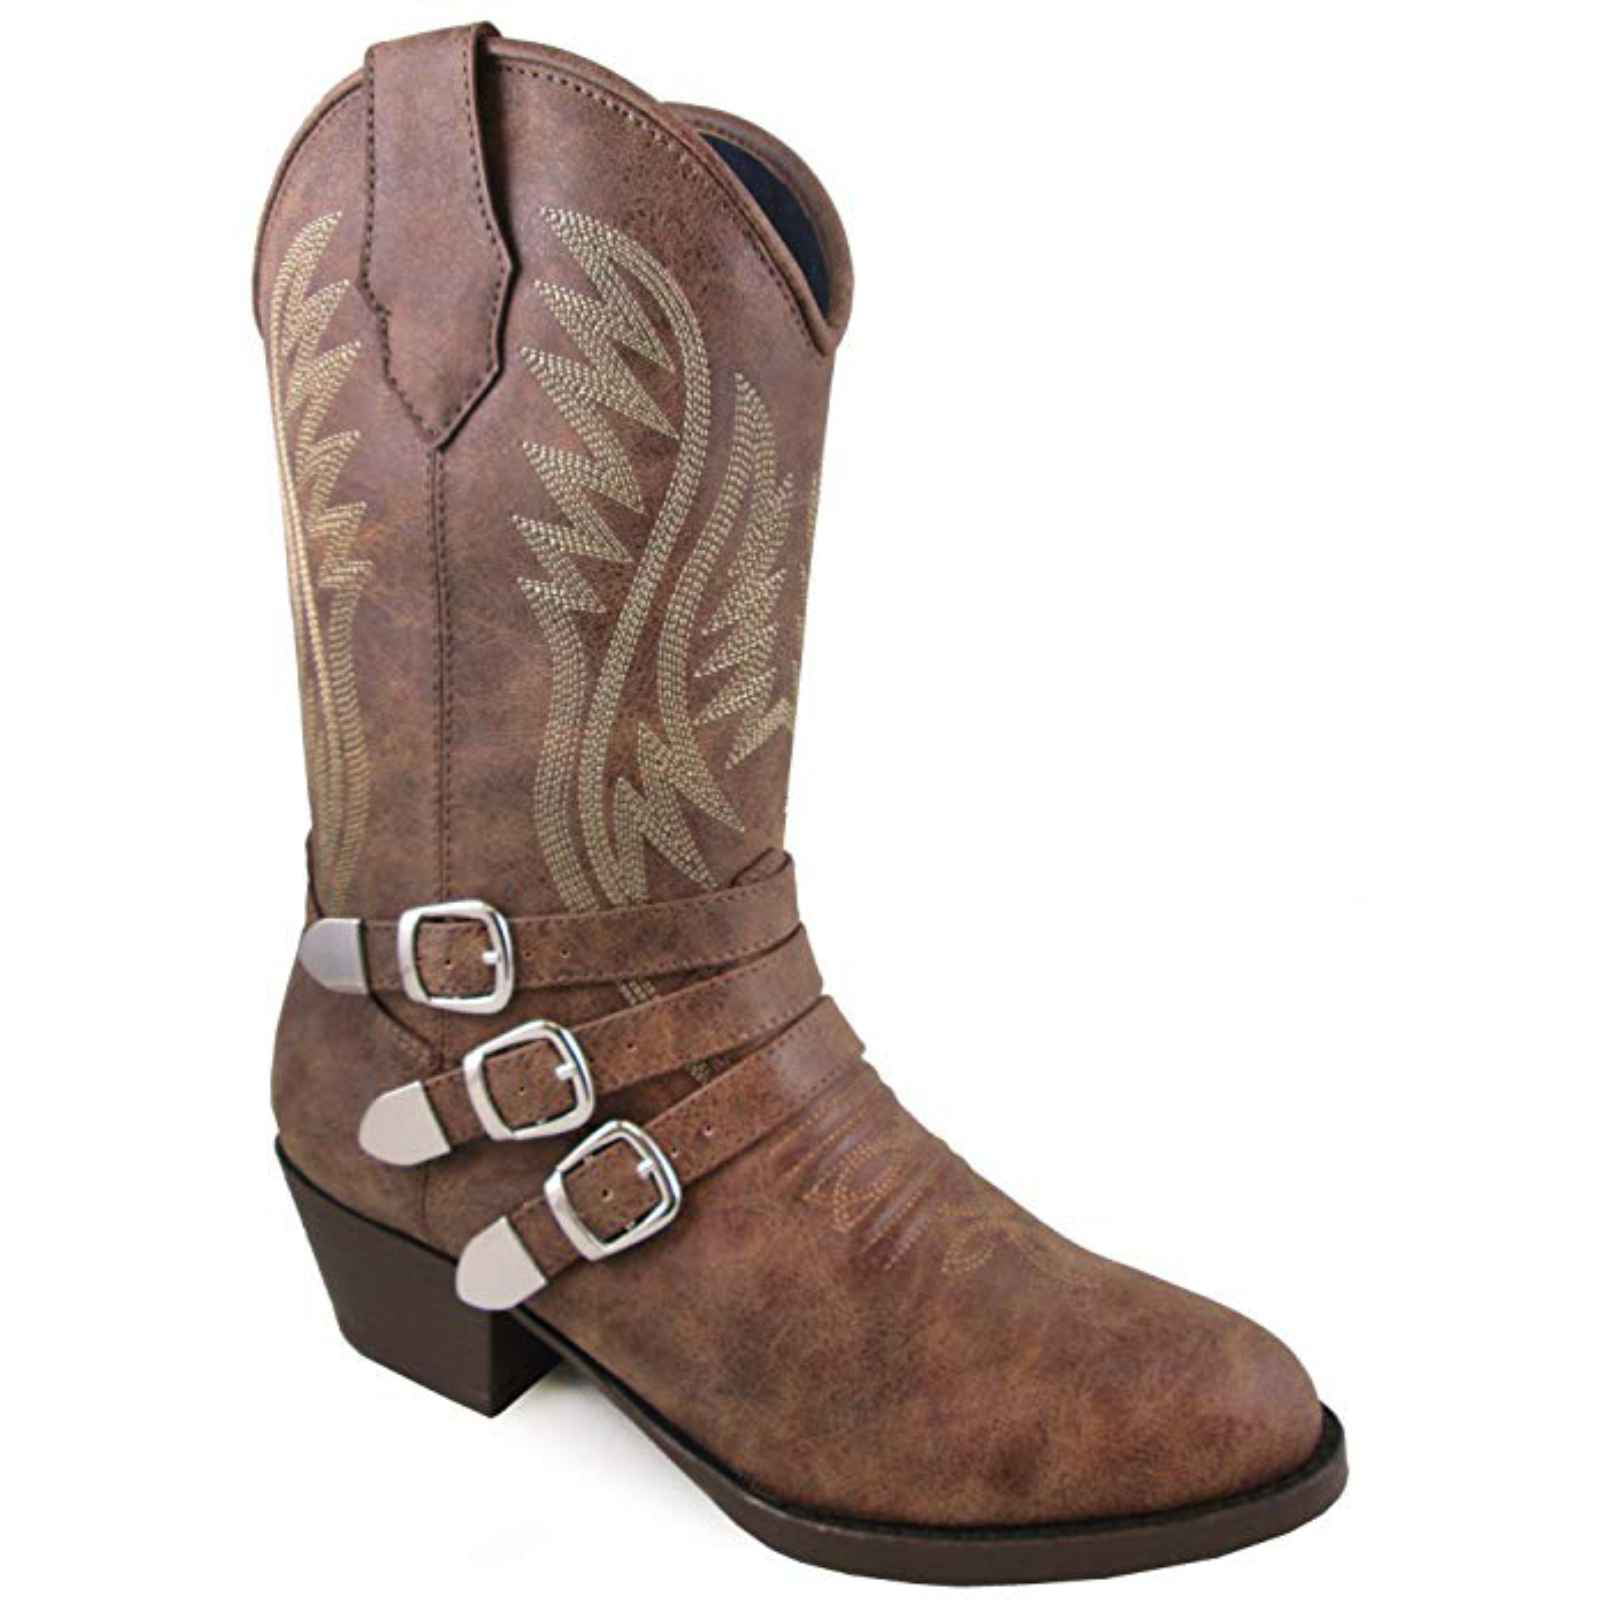 BROWN TAN FAUX LEATHER SIZE 6 7 8 9 10 11 12 WESTERN COWBOY PULL ON BUCKLE BOOTS 